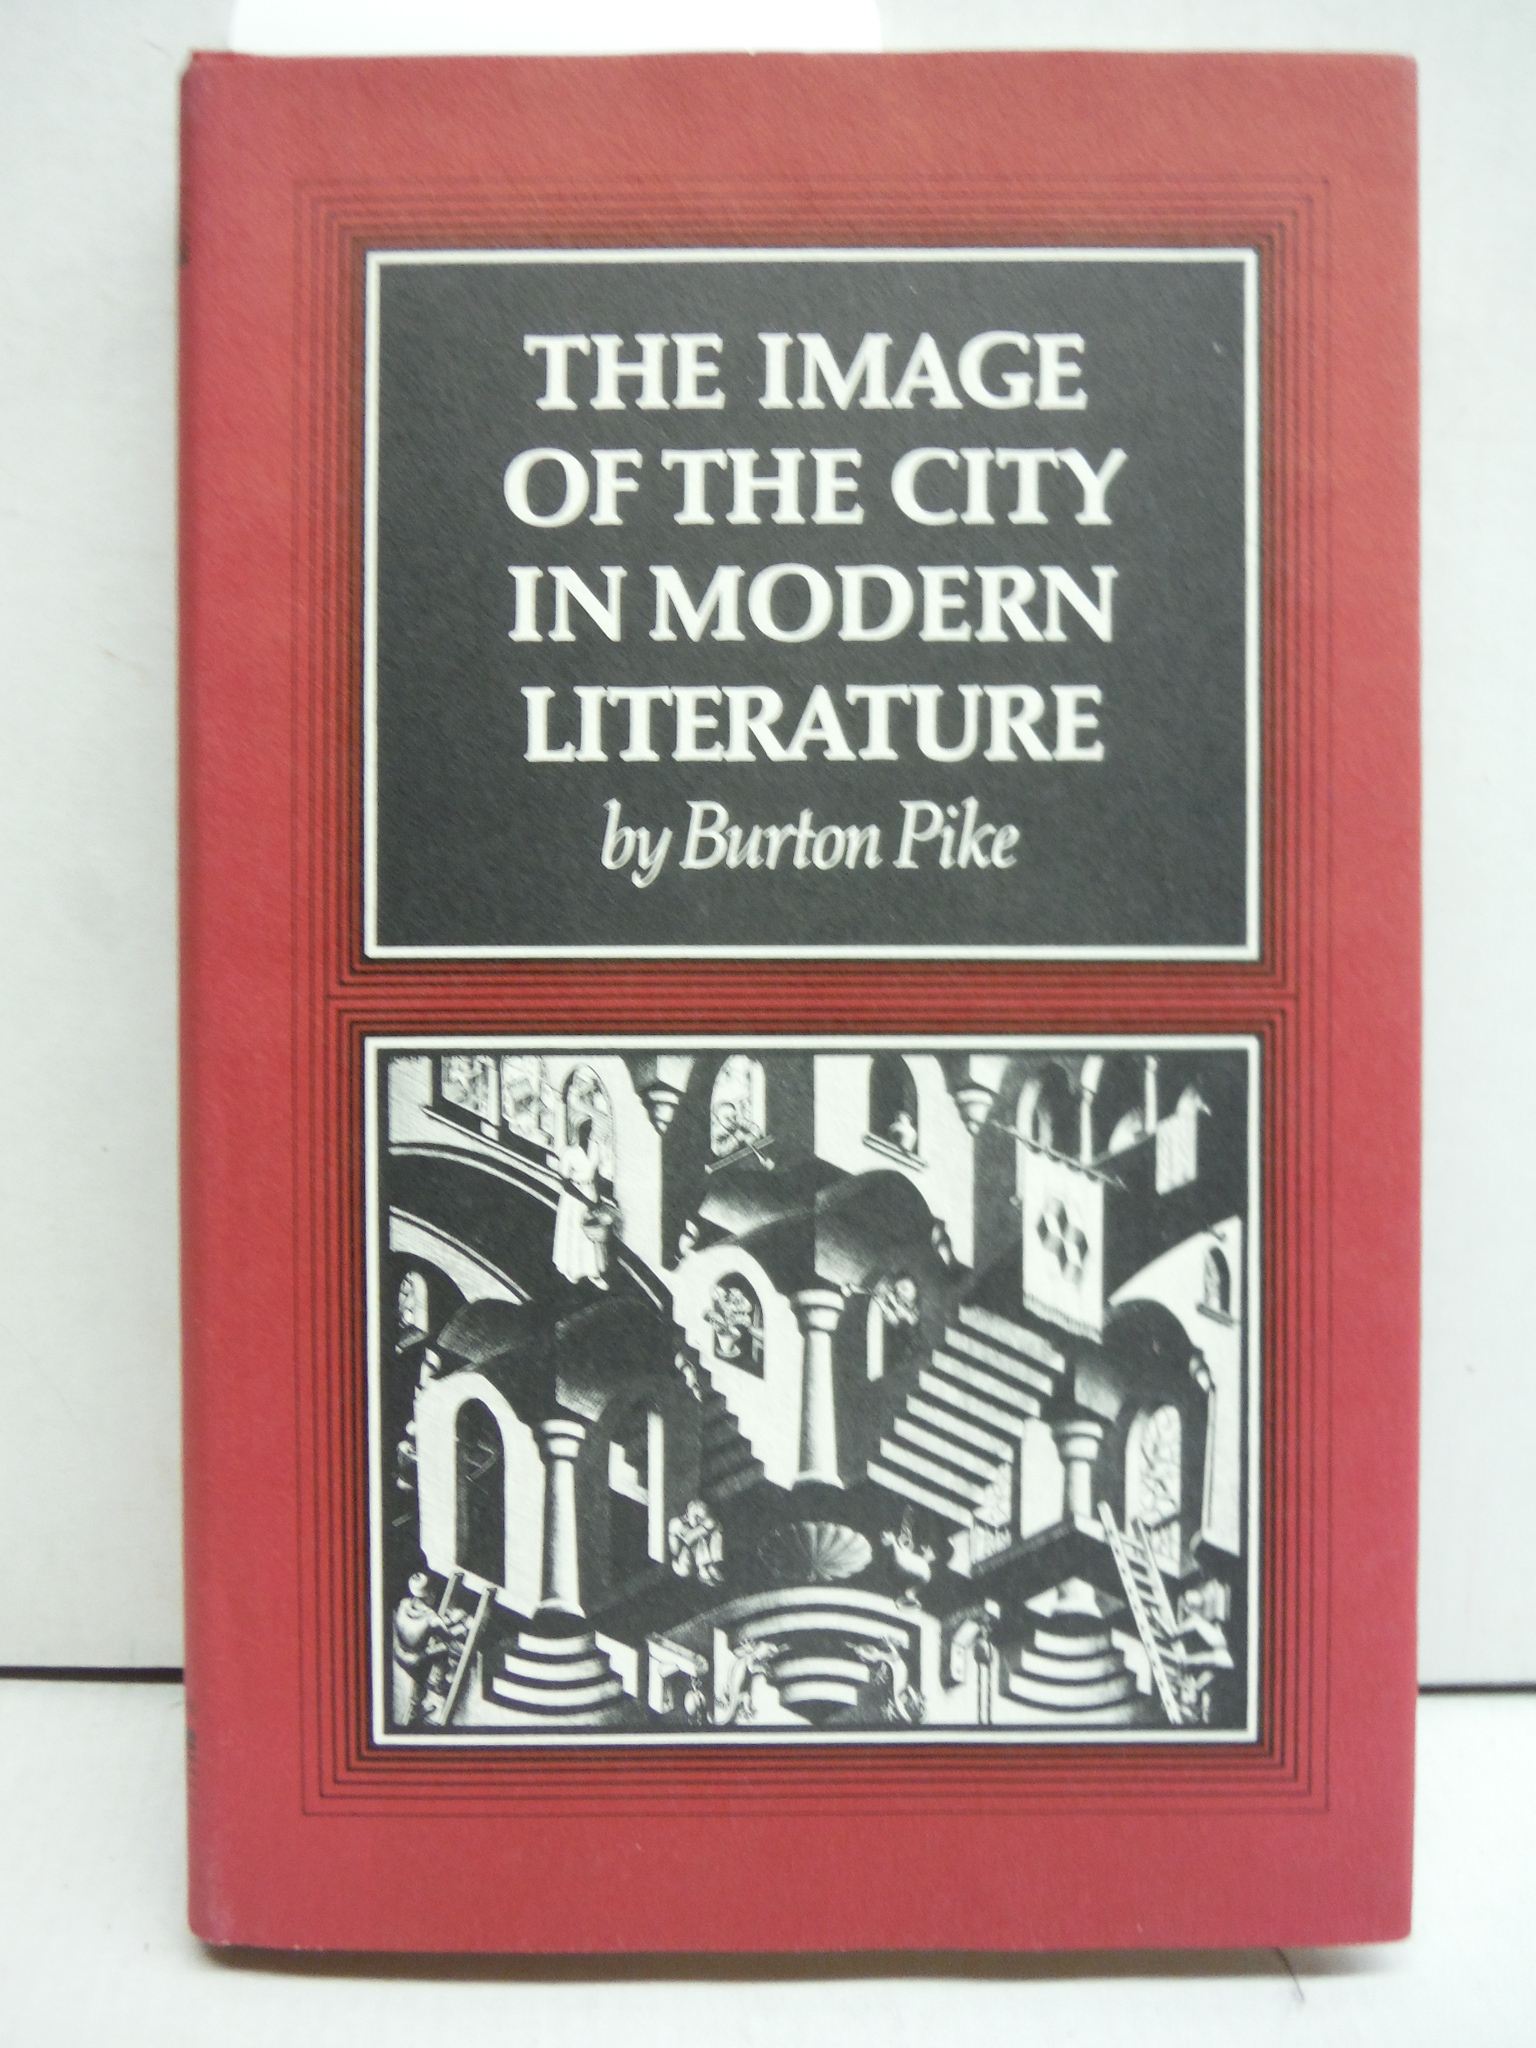 The Image of the City in Modern Literature (Princeton Essays in Literature)